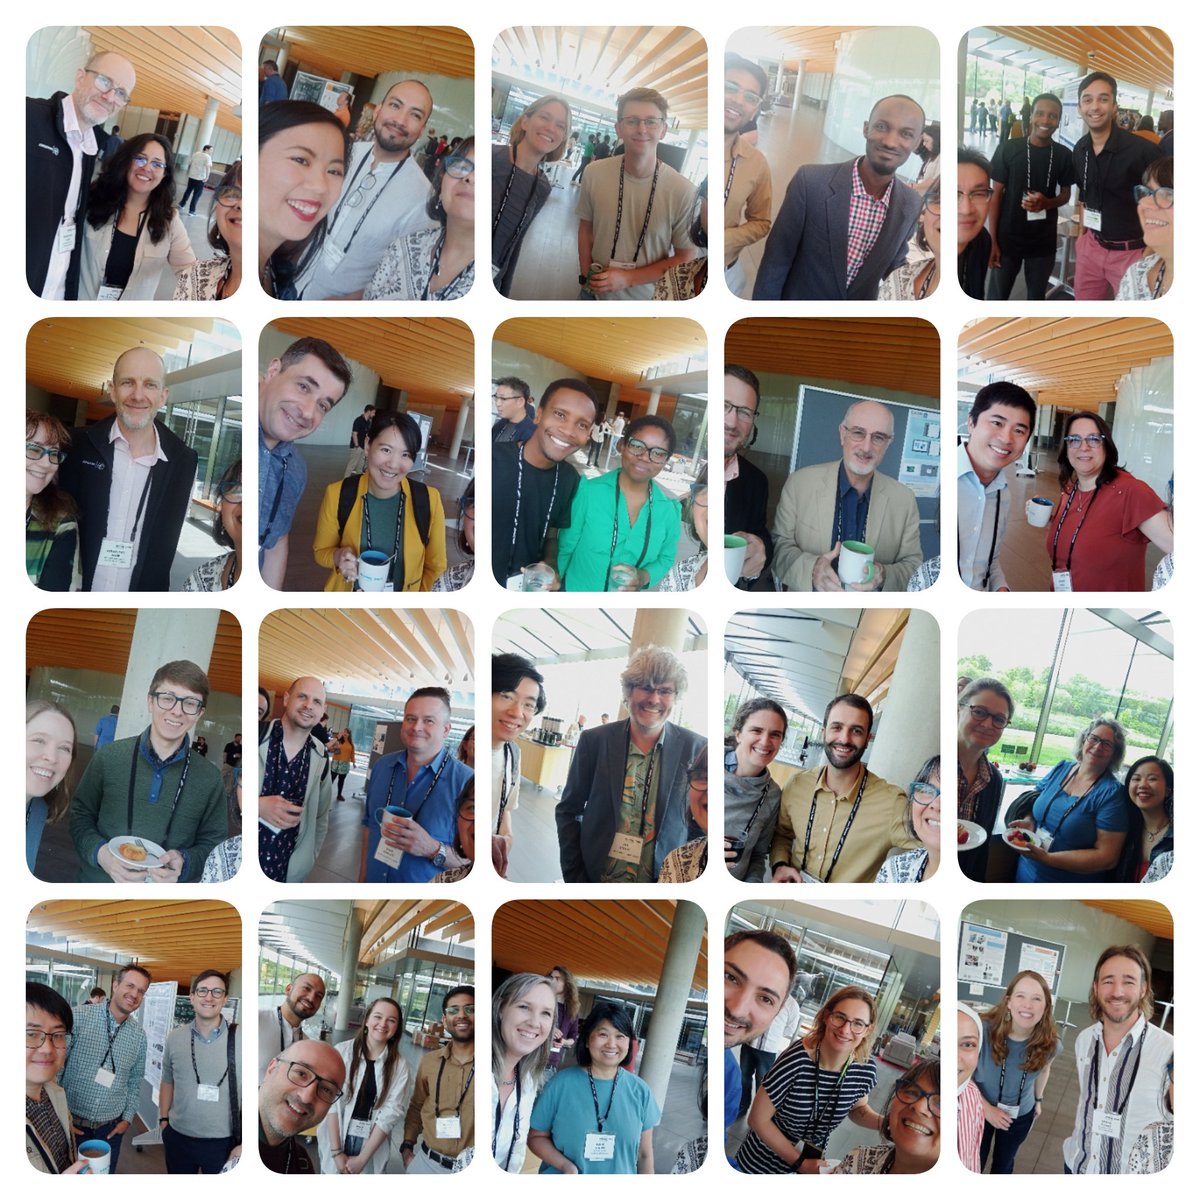 Thanks Leon @ScopeShifu, Caron @caron_ajacobs, Leonel @MalacridaLab and all for such a wonderful conference!!!
Looking forward to continue brainstorming on @SpreadMicroscopy to ensure the 
#Right to #Science and #ODS2030
#ODS4 #ODS5 #ODS3 #ODS8 #ODS17